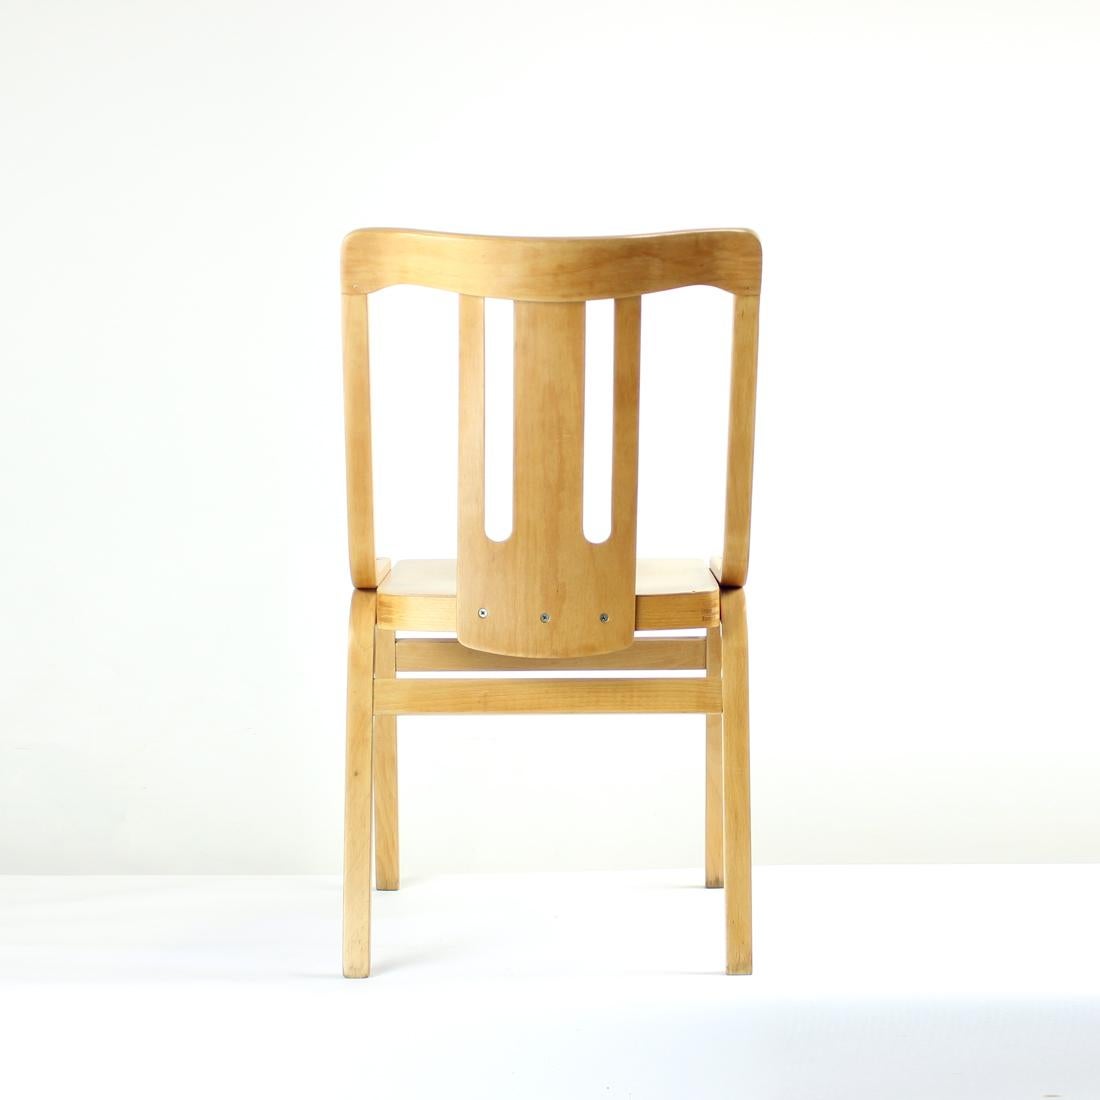 Oak Midcentury Wooden Dining Chair by Ton, Czechoslovakia 1960s For Sale